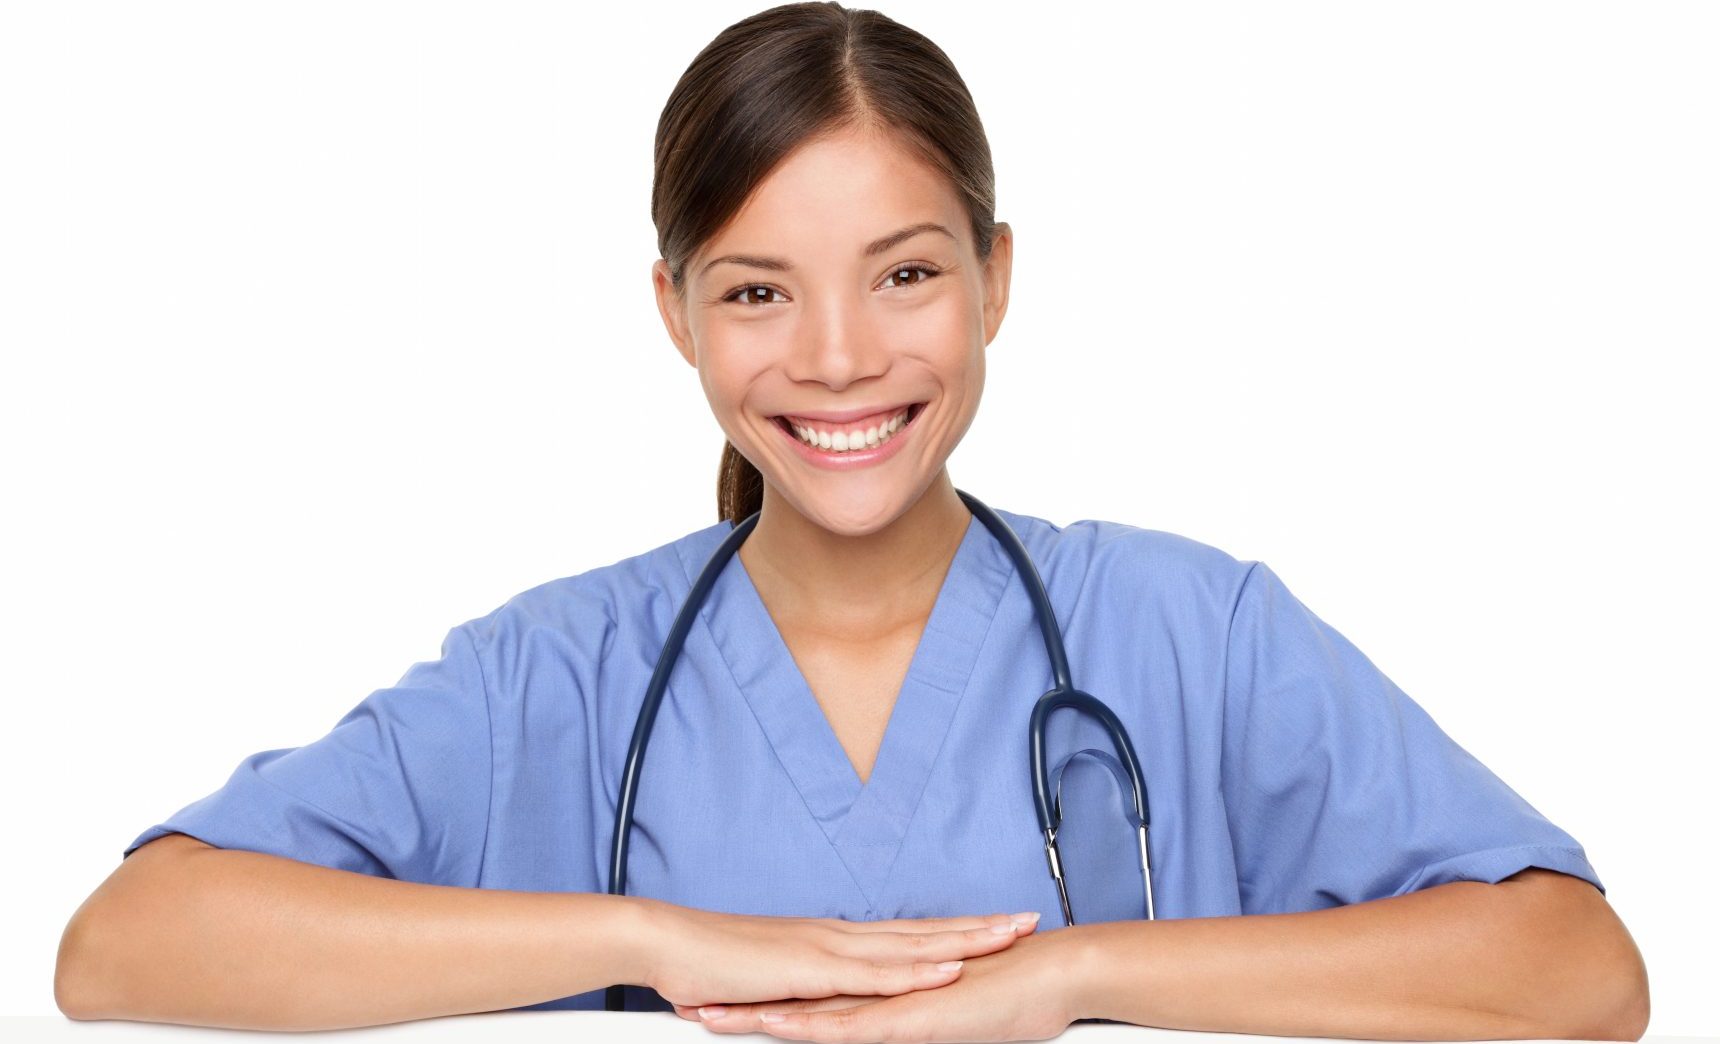 Smiling health care worker